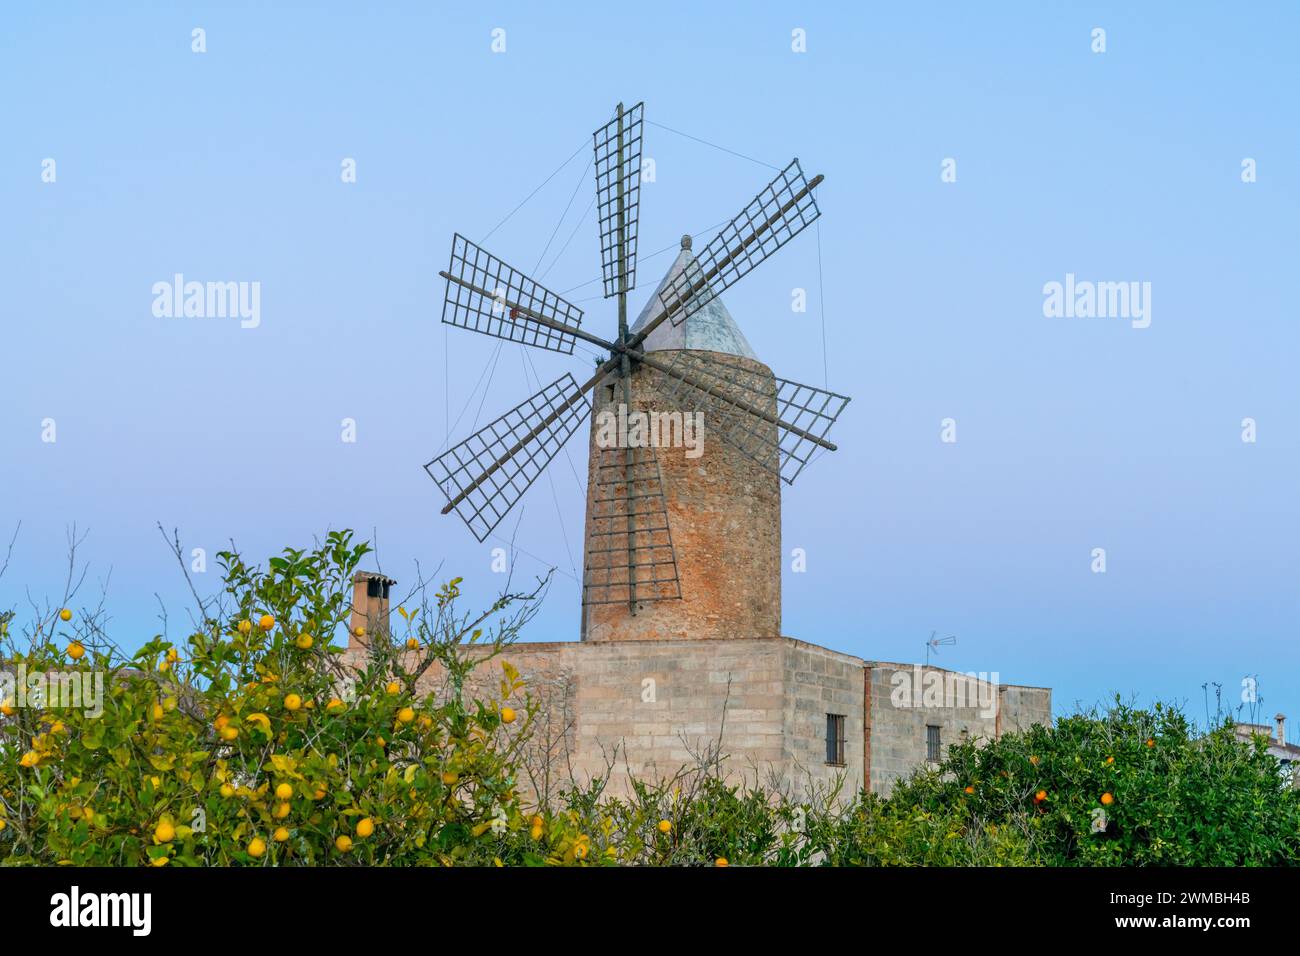 Algaida, Spain - 21 January, 2024: historic windmill in the country town of Algaida in the interior of Mallorca with lemon trees in the foreground Stock Photo